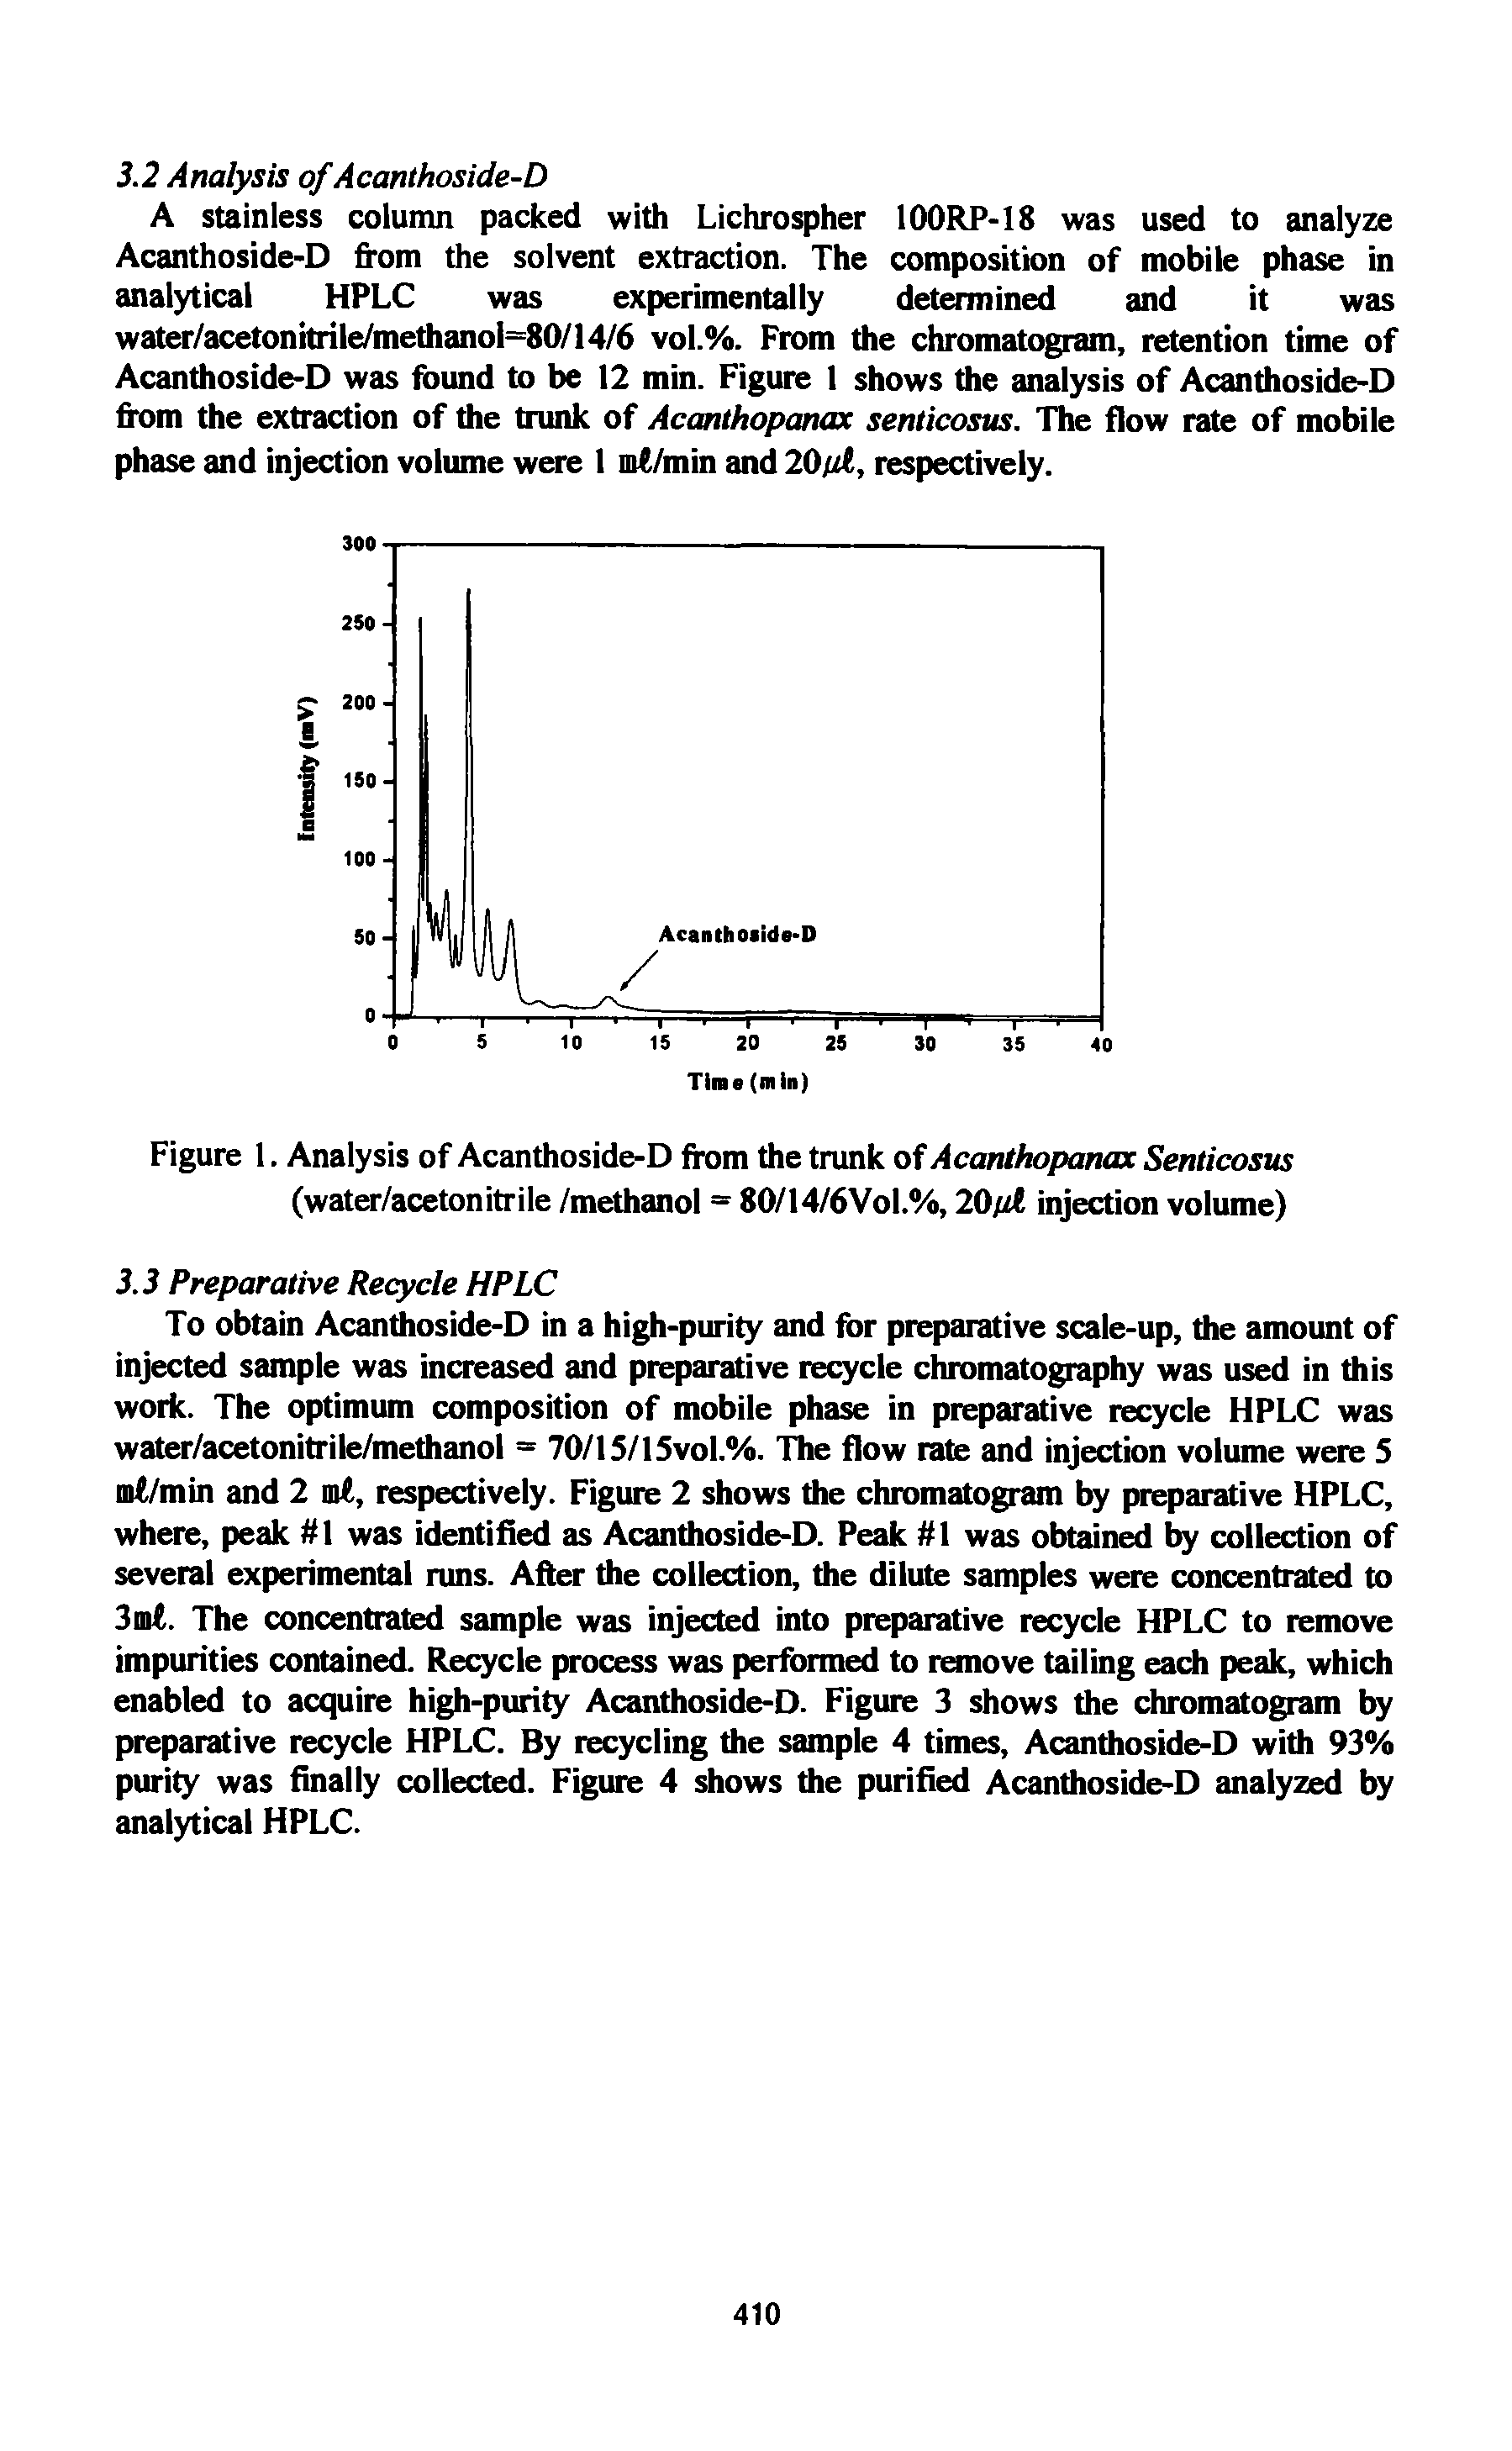 Figure 1. Analysis of Acanthoside-D from the trunk of Acanthopanax Senticosus (water/acetonitrile /methanol = 80/14/6Vol.%, 20fd injection volume)...